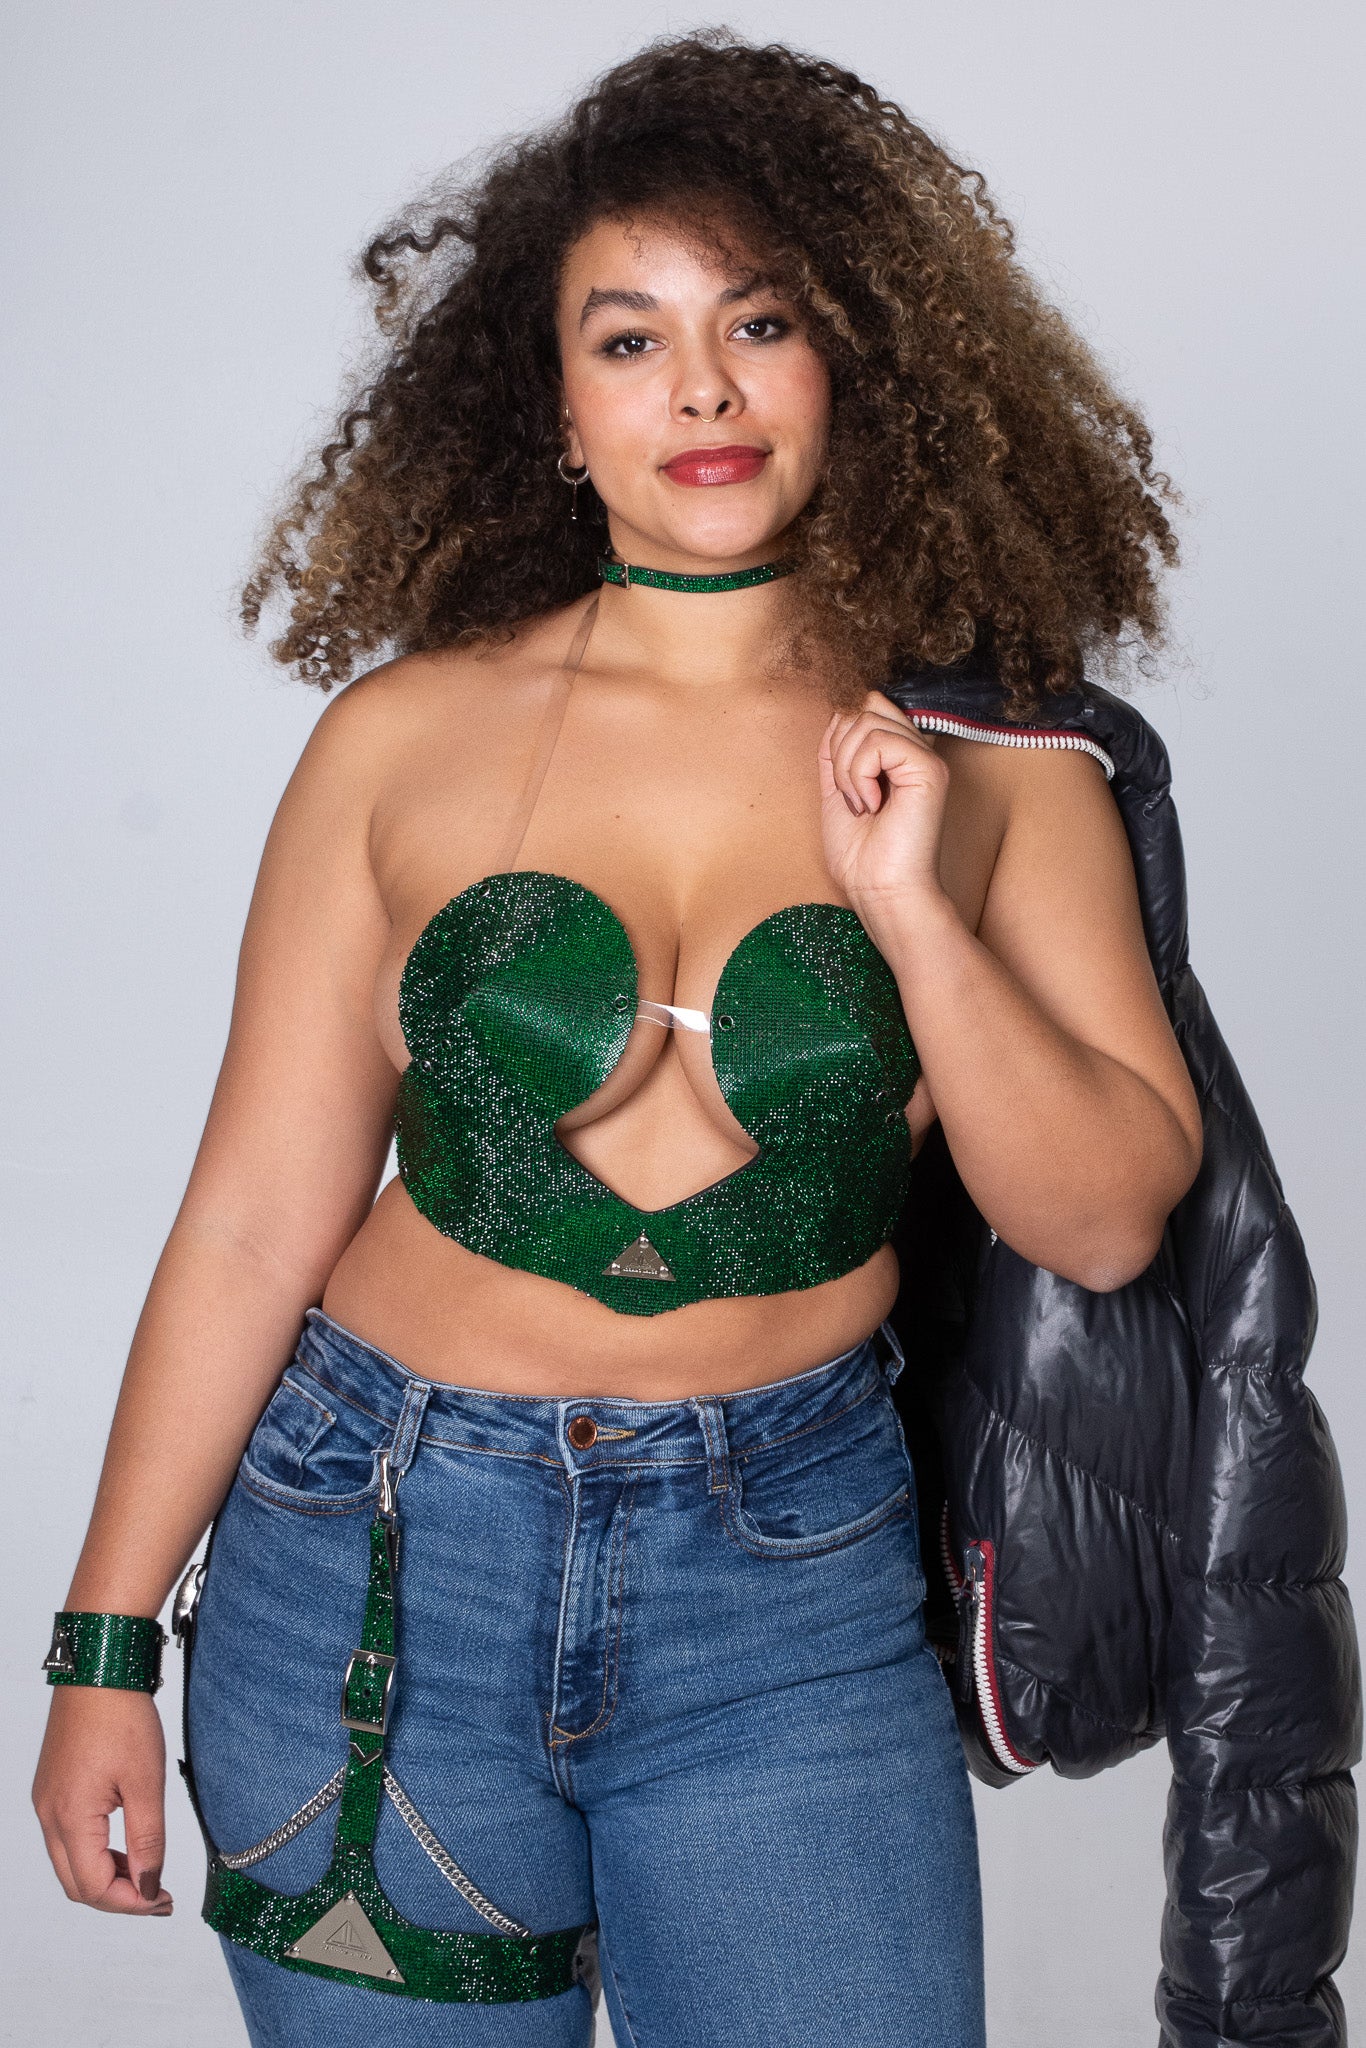 Chic emerald green MIKEY Bra with a fashionable graphic design, adding vibrancy